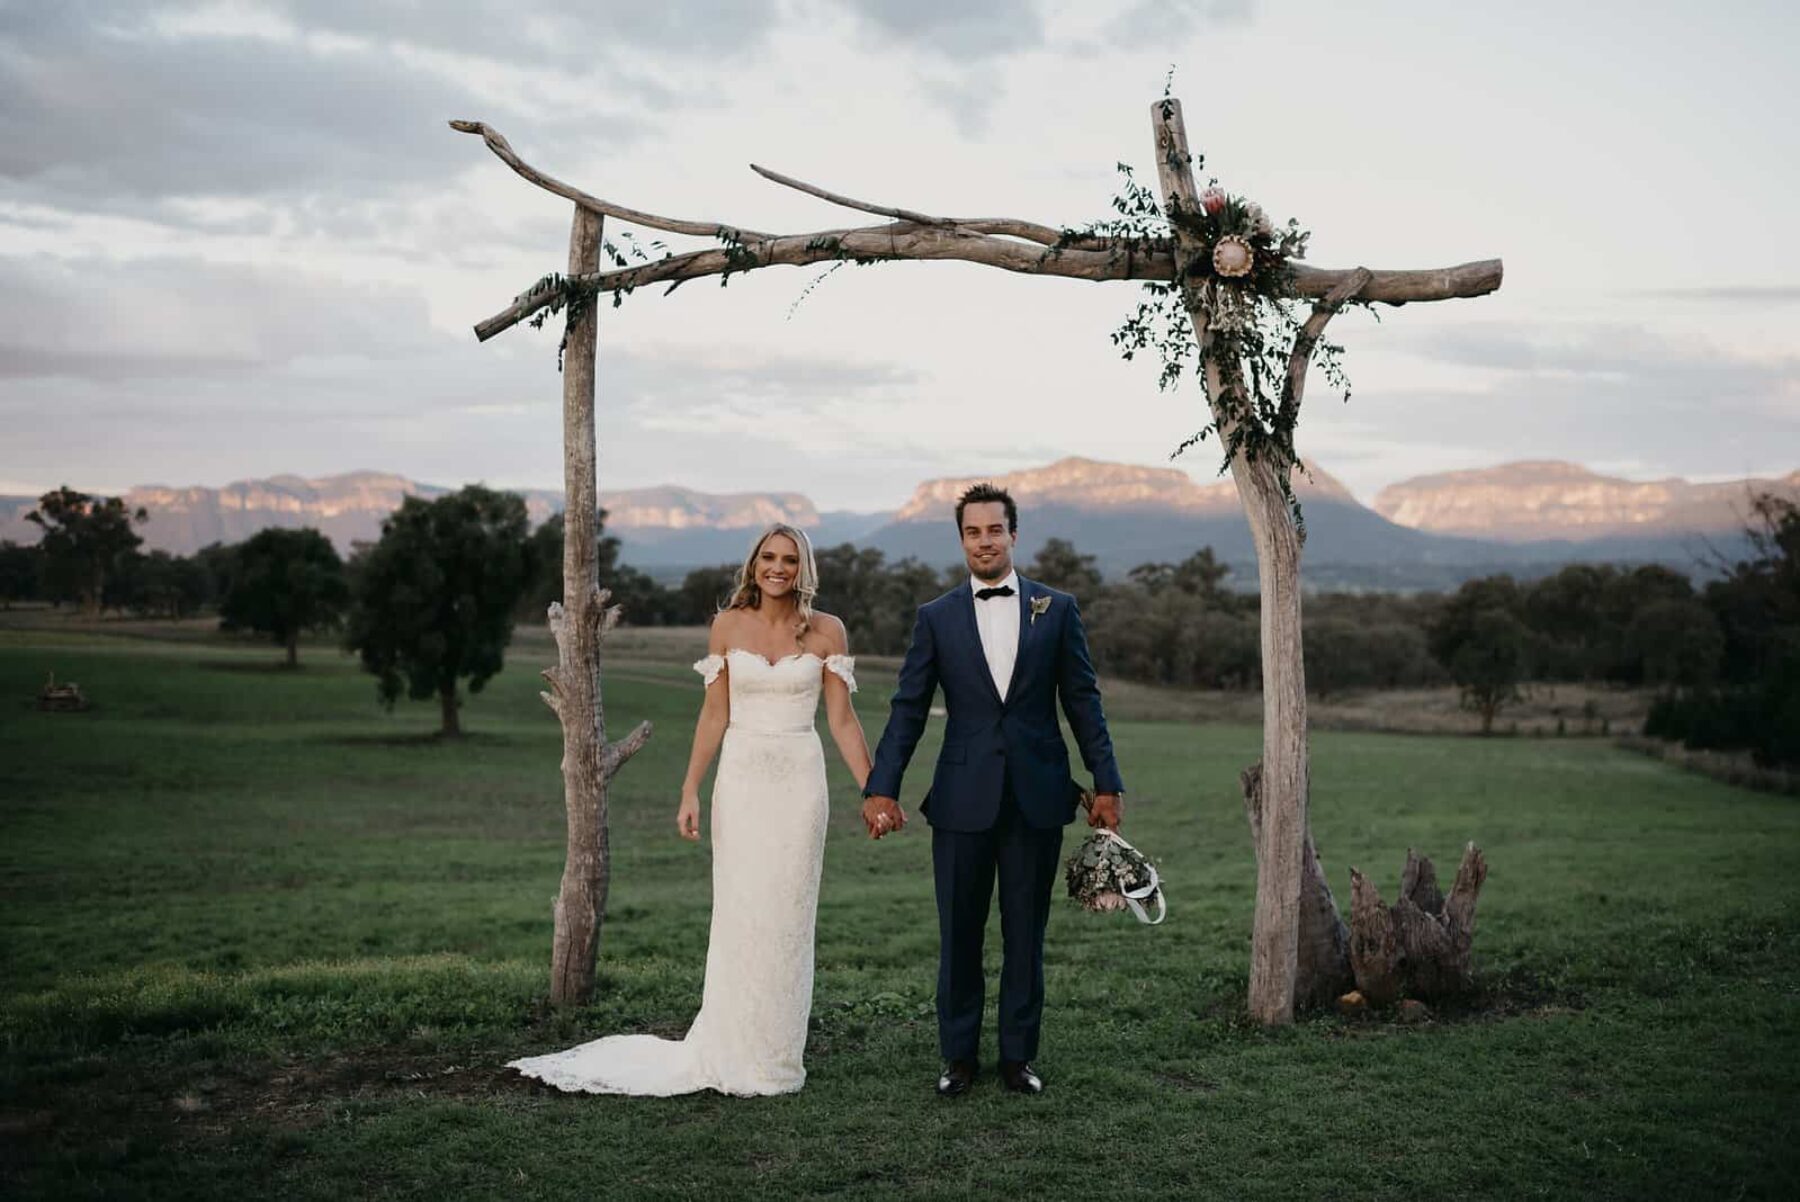 DIY timber wedding arch with native flowers